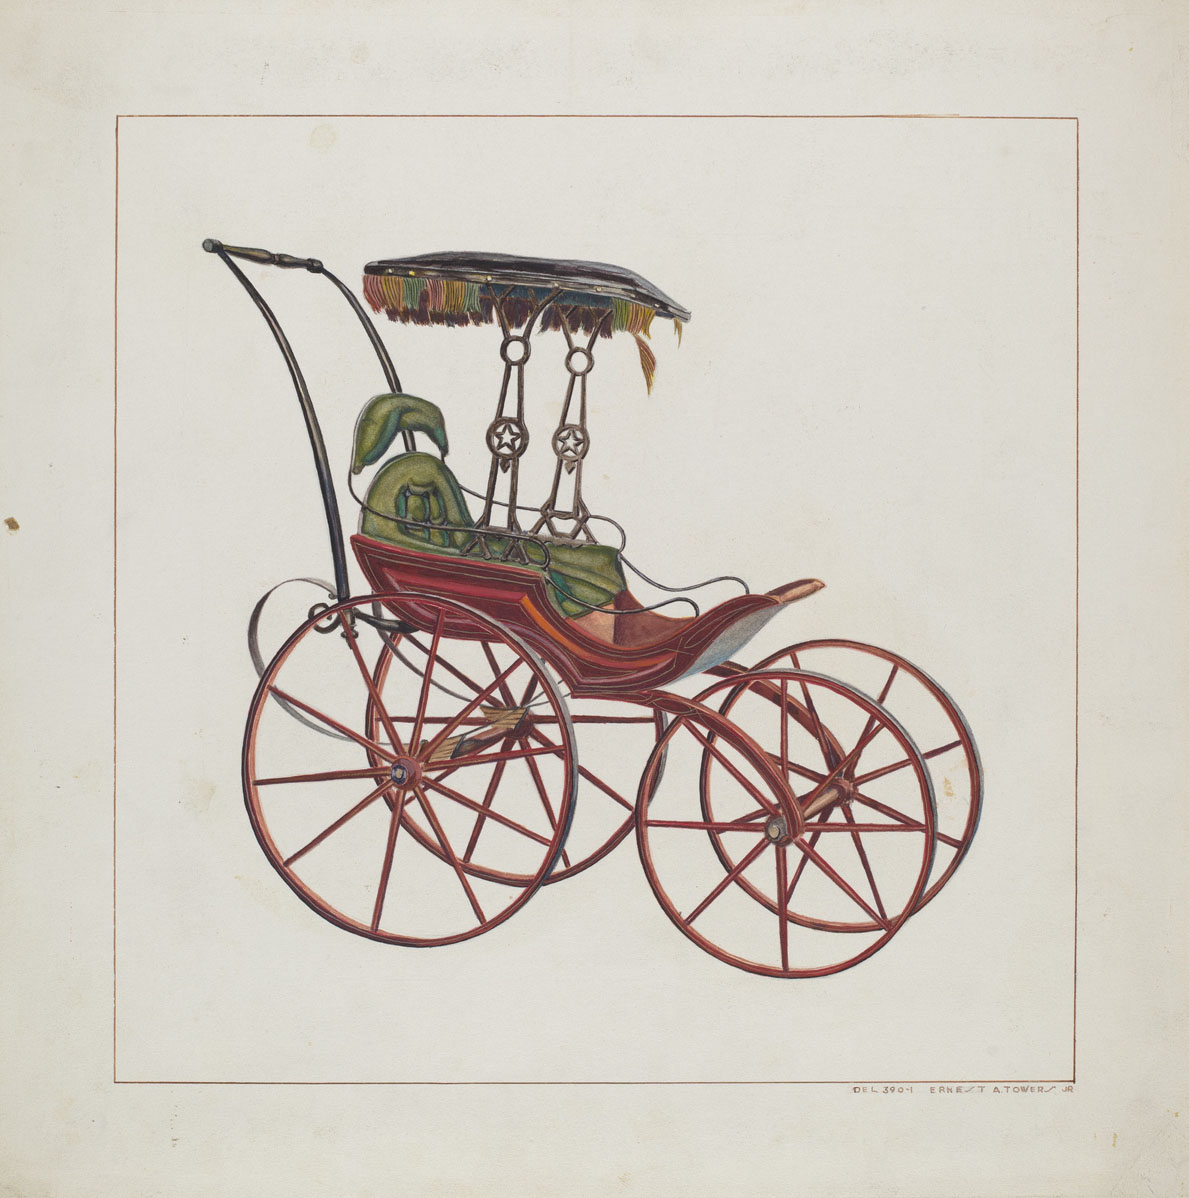 Ernest A. Towers, Jr., Baby Carriage, American, active c. 1935, c. 1927, watercolor, pen and ink, and graphite on paperboard, Index of American Design